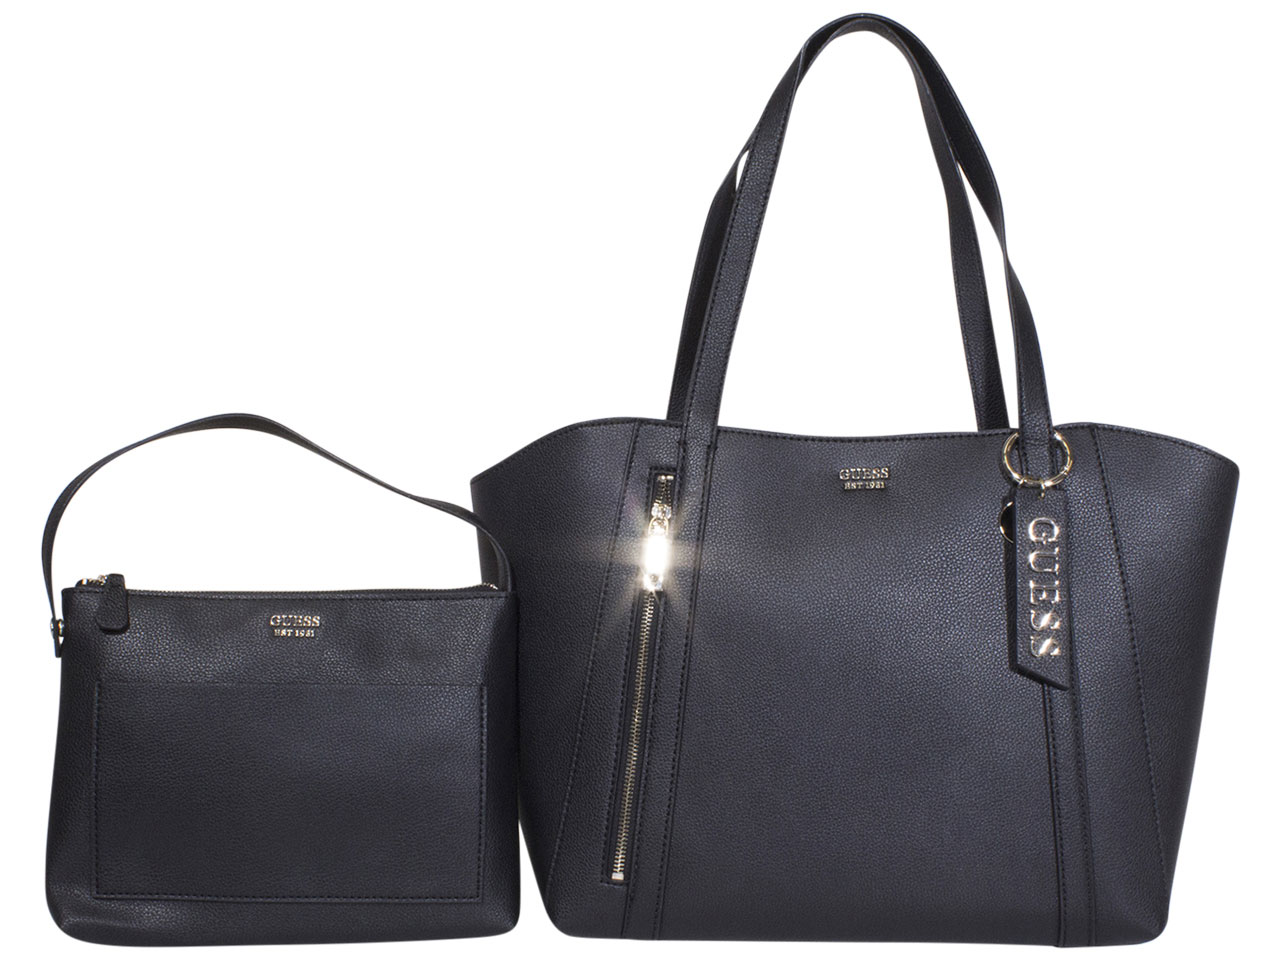 Guess Women's Naya Tote Handbag 2-Piece Set With Convertible Pouch Black